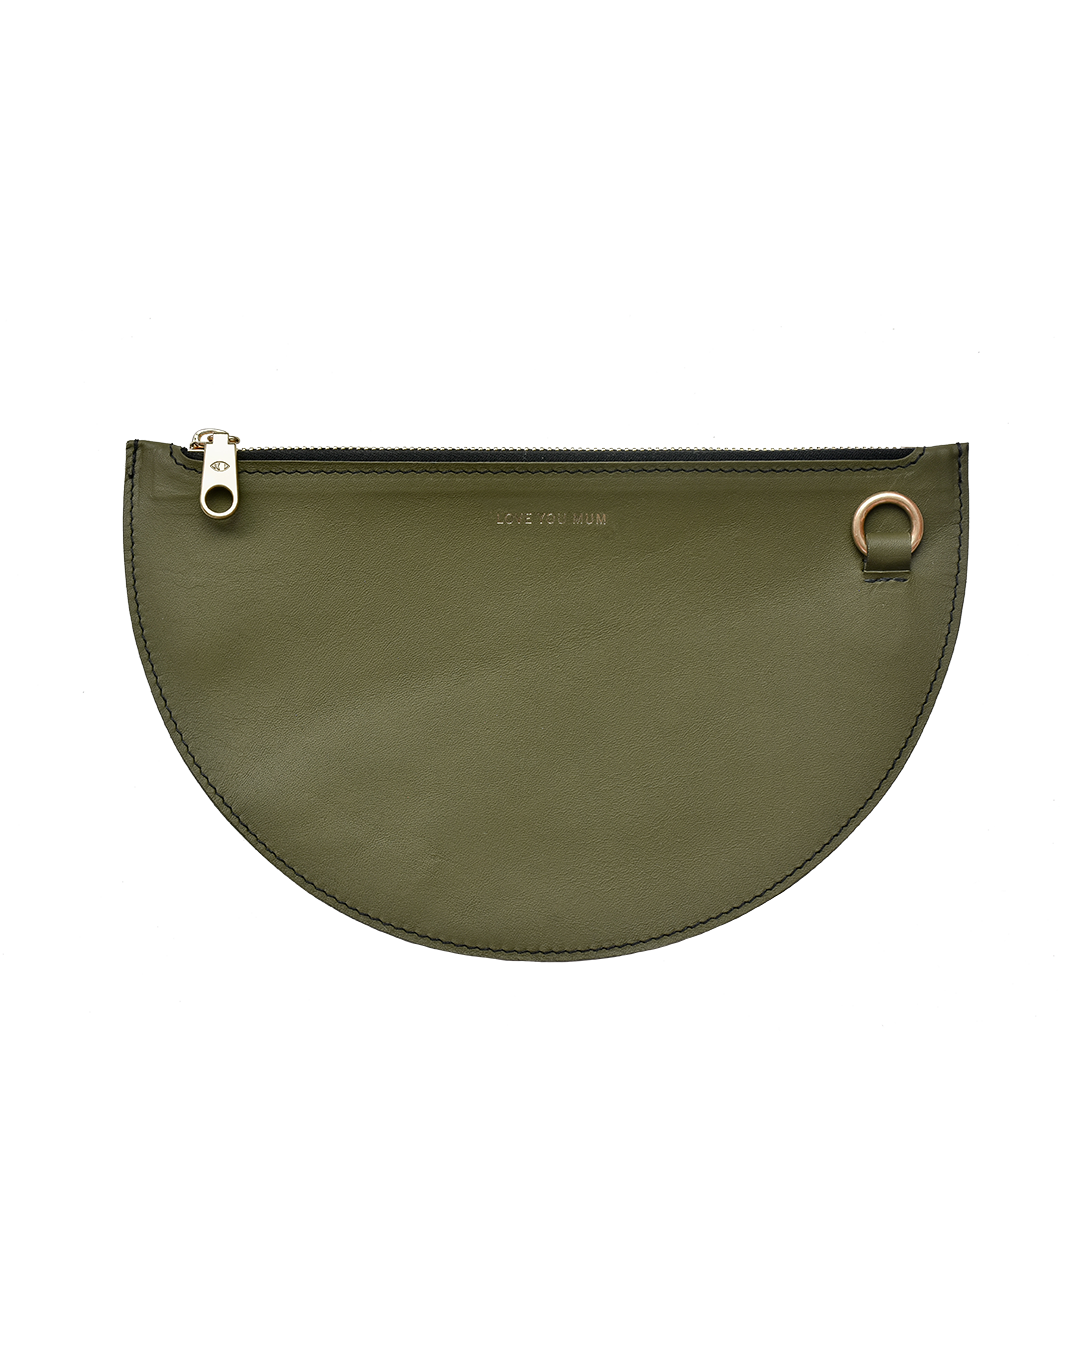 m moon phone pouch leather kit / olive